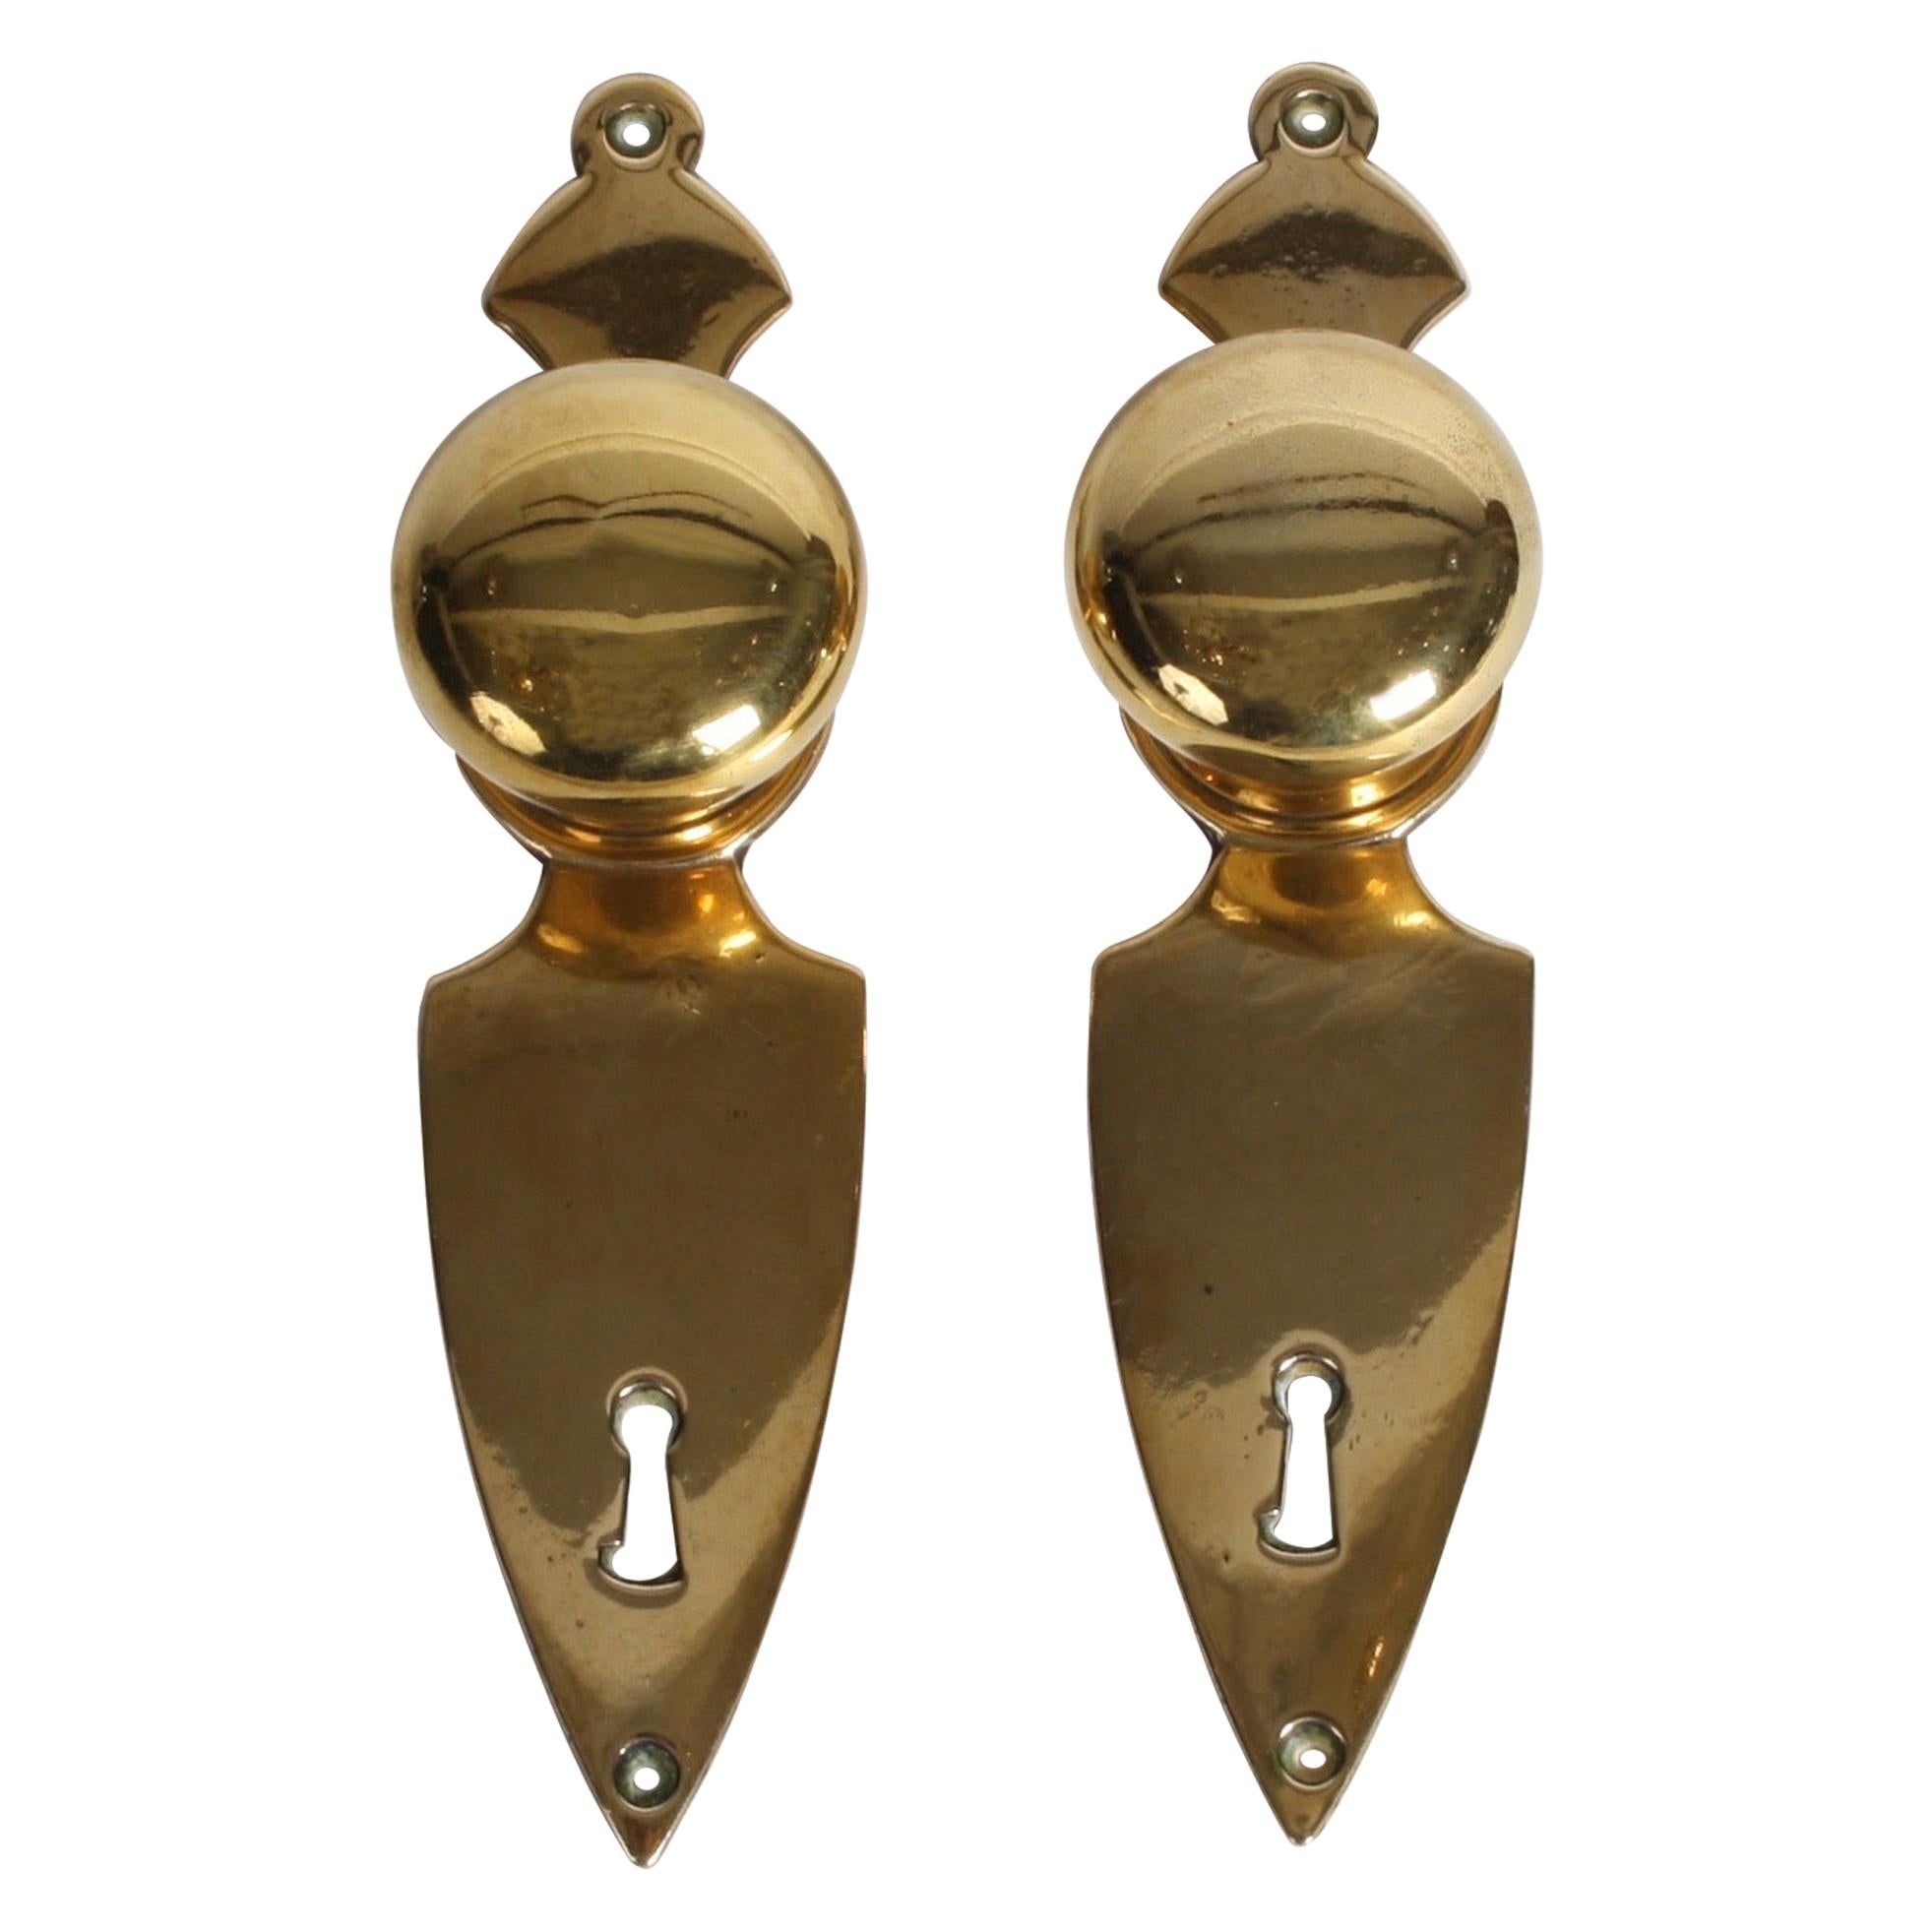 Pair of Arts and Crafts Door Knobs For Sale at 1stDibs